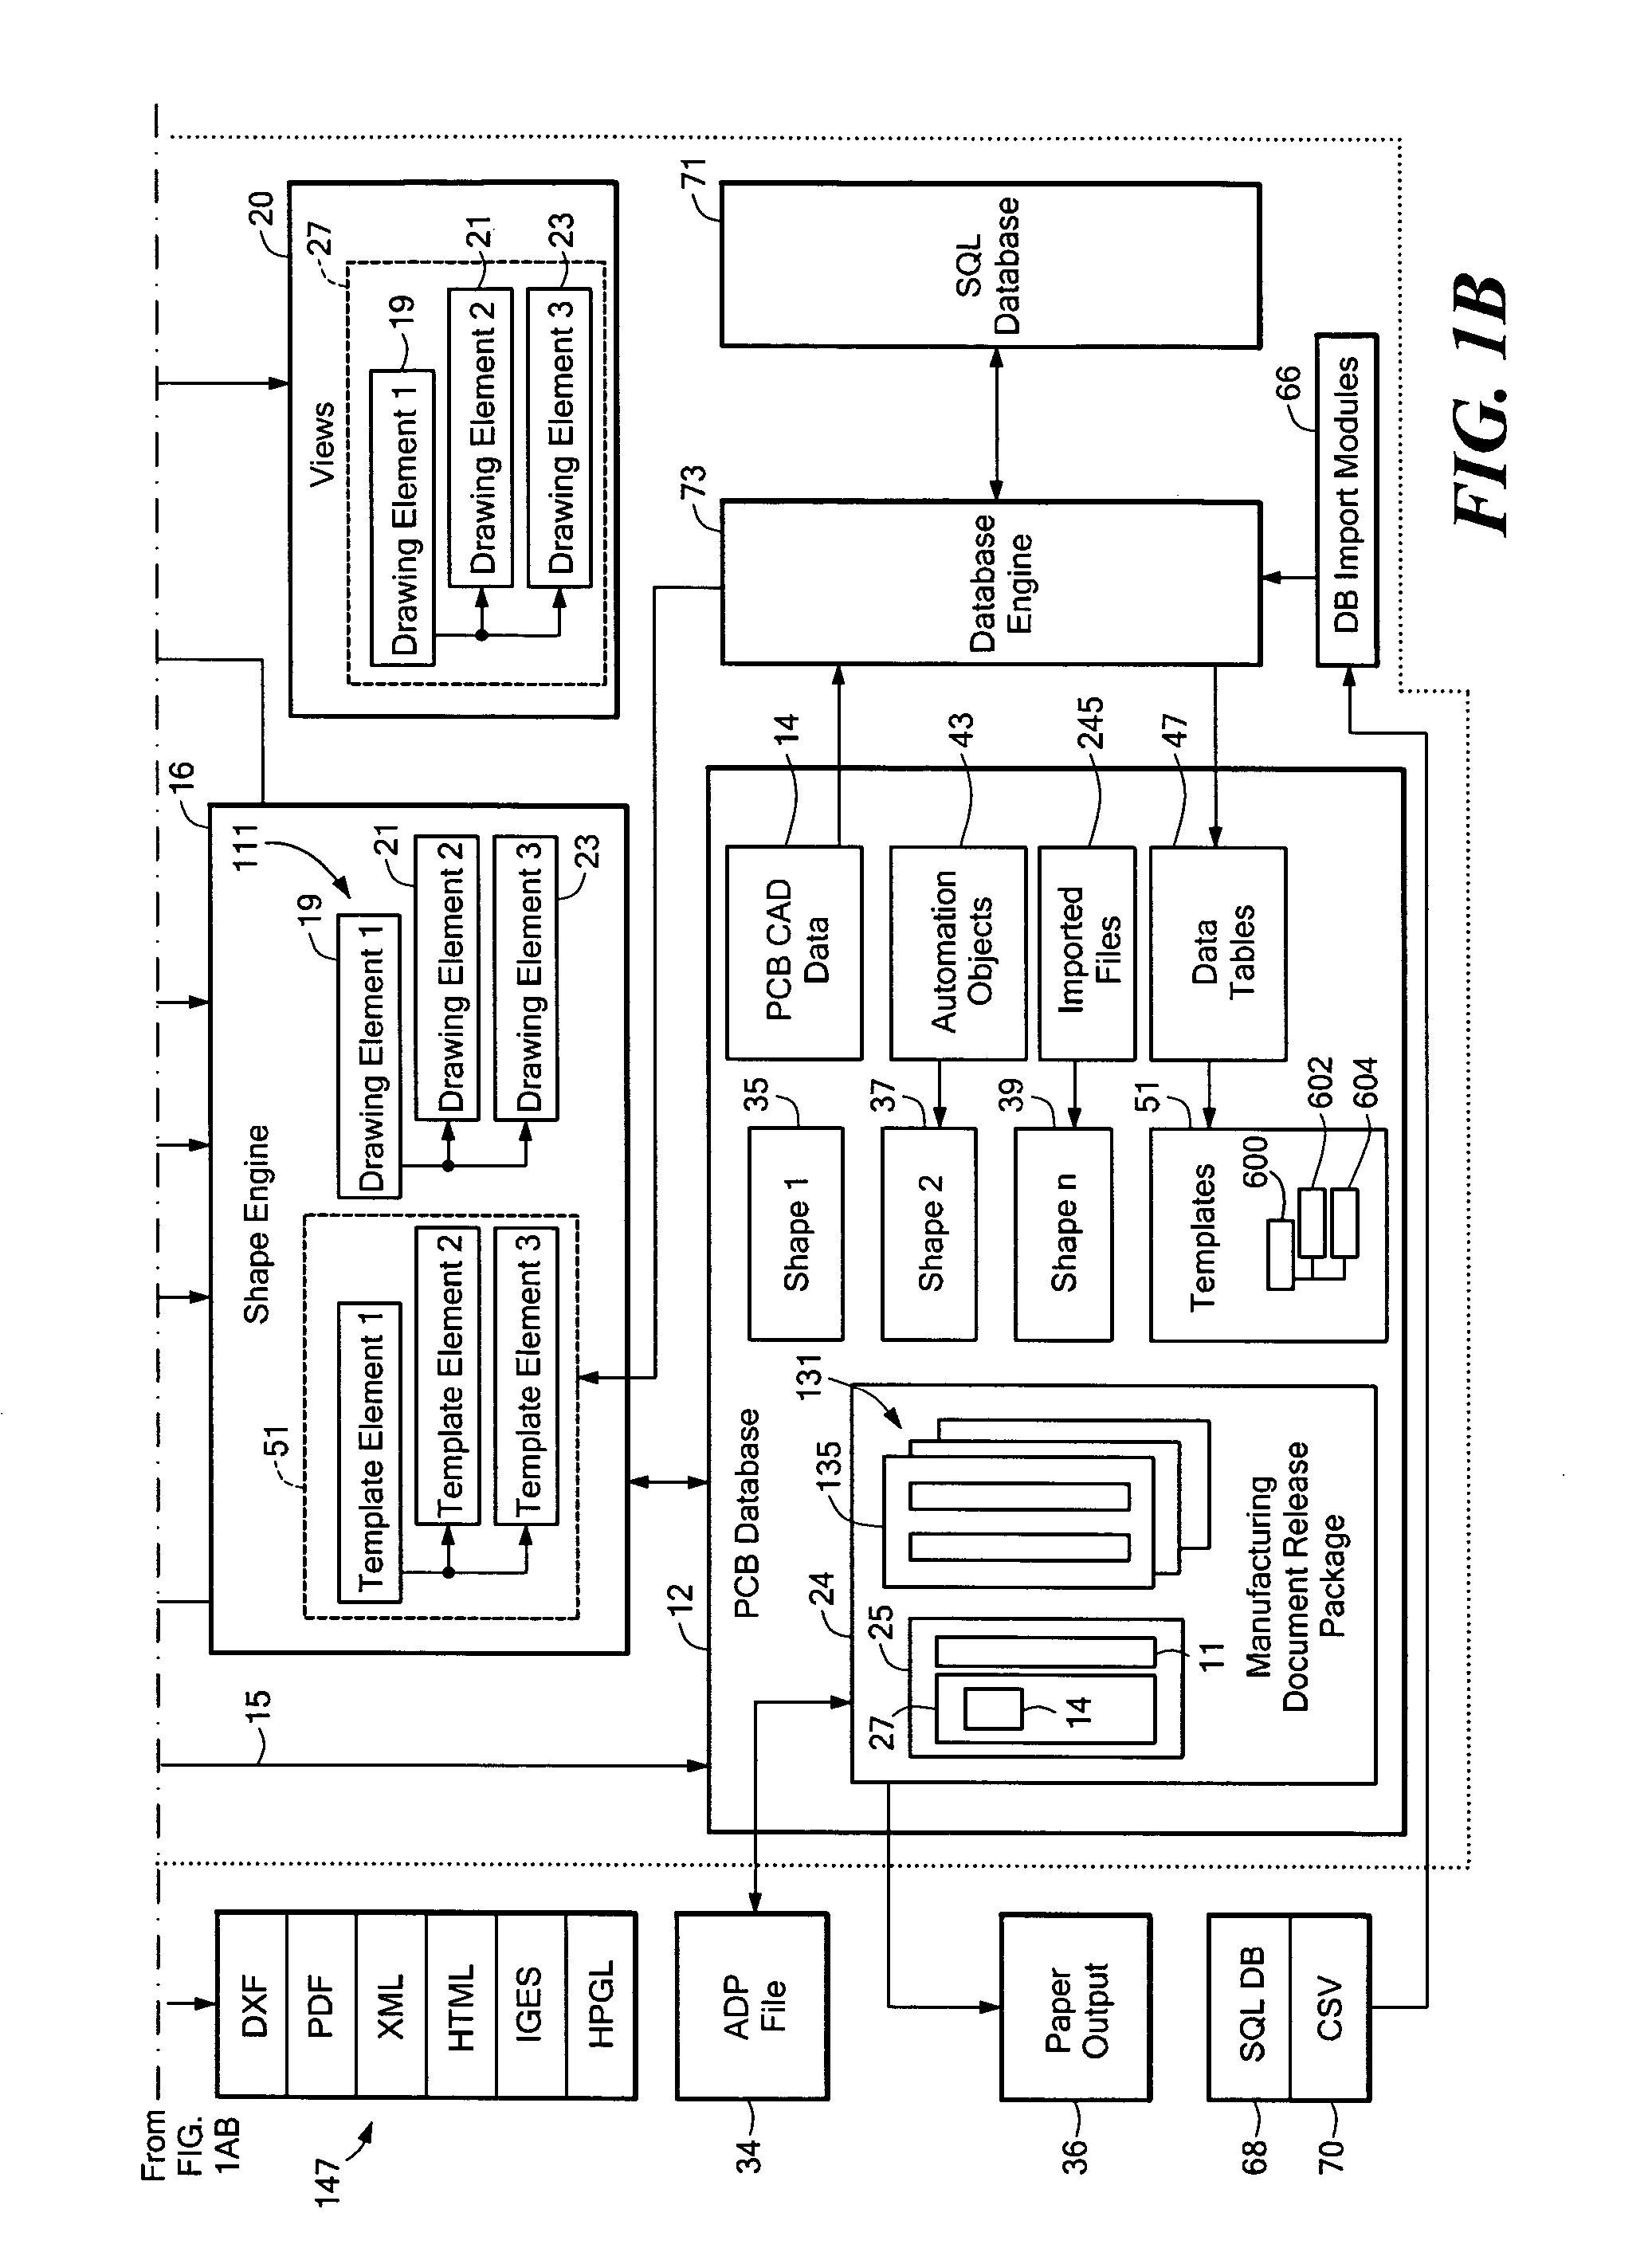 Automated PCB manufacturing documentation release package system and method